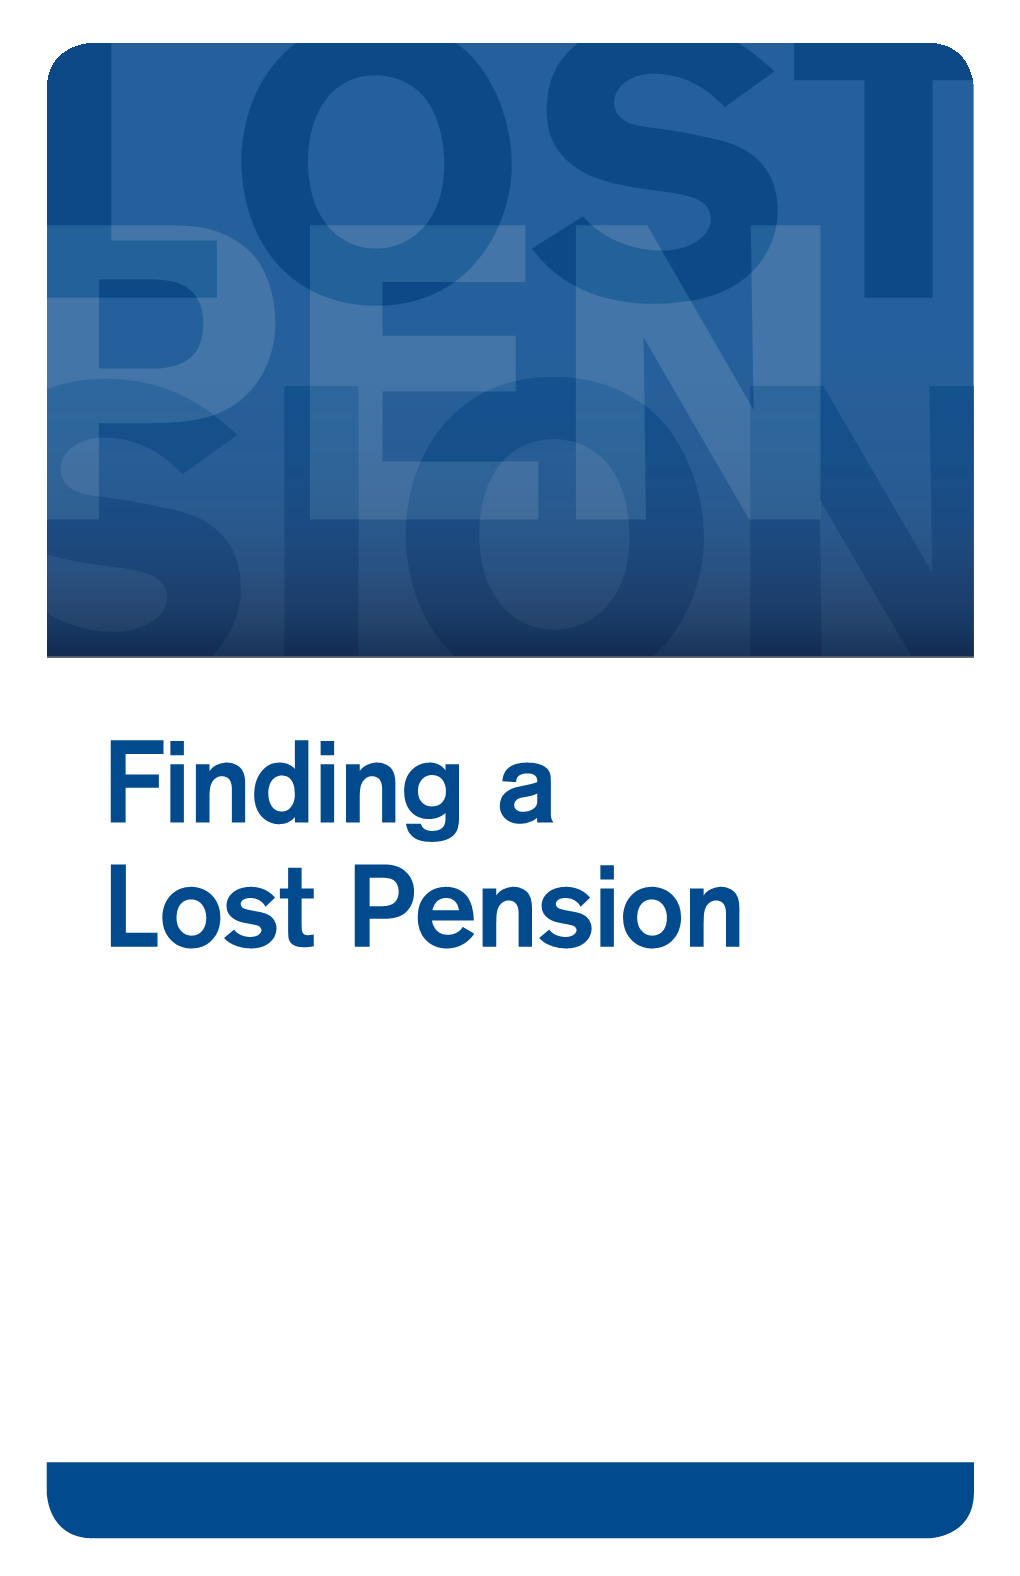 Finding a Lost Pension Contents